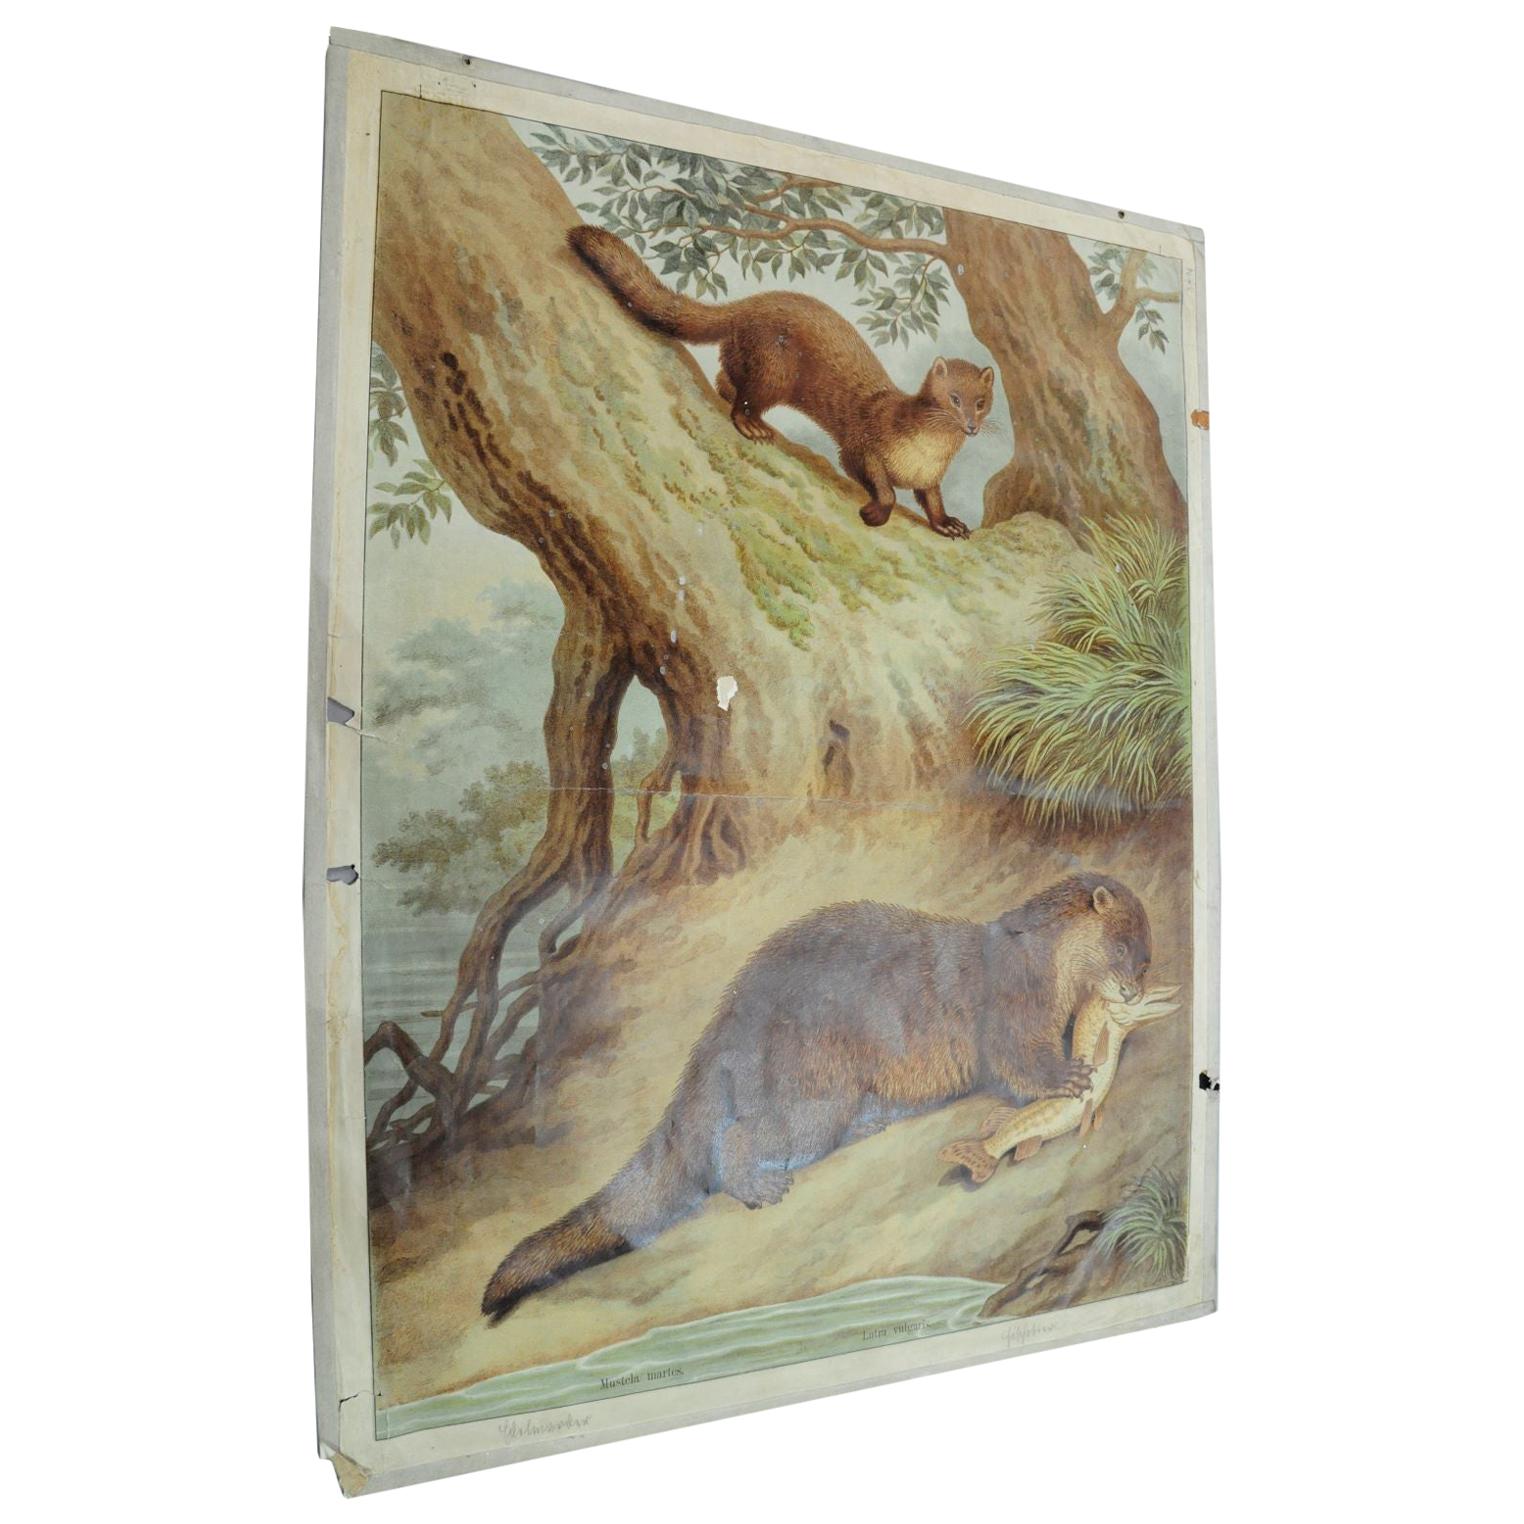 Old Vintage Wall Chart Weasel Otter Country Style Poster Print For Sale